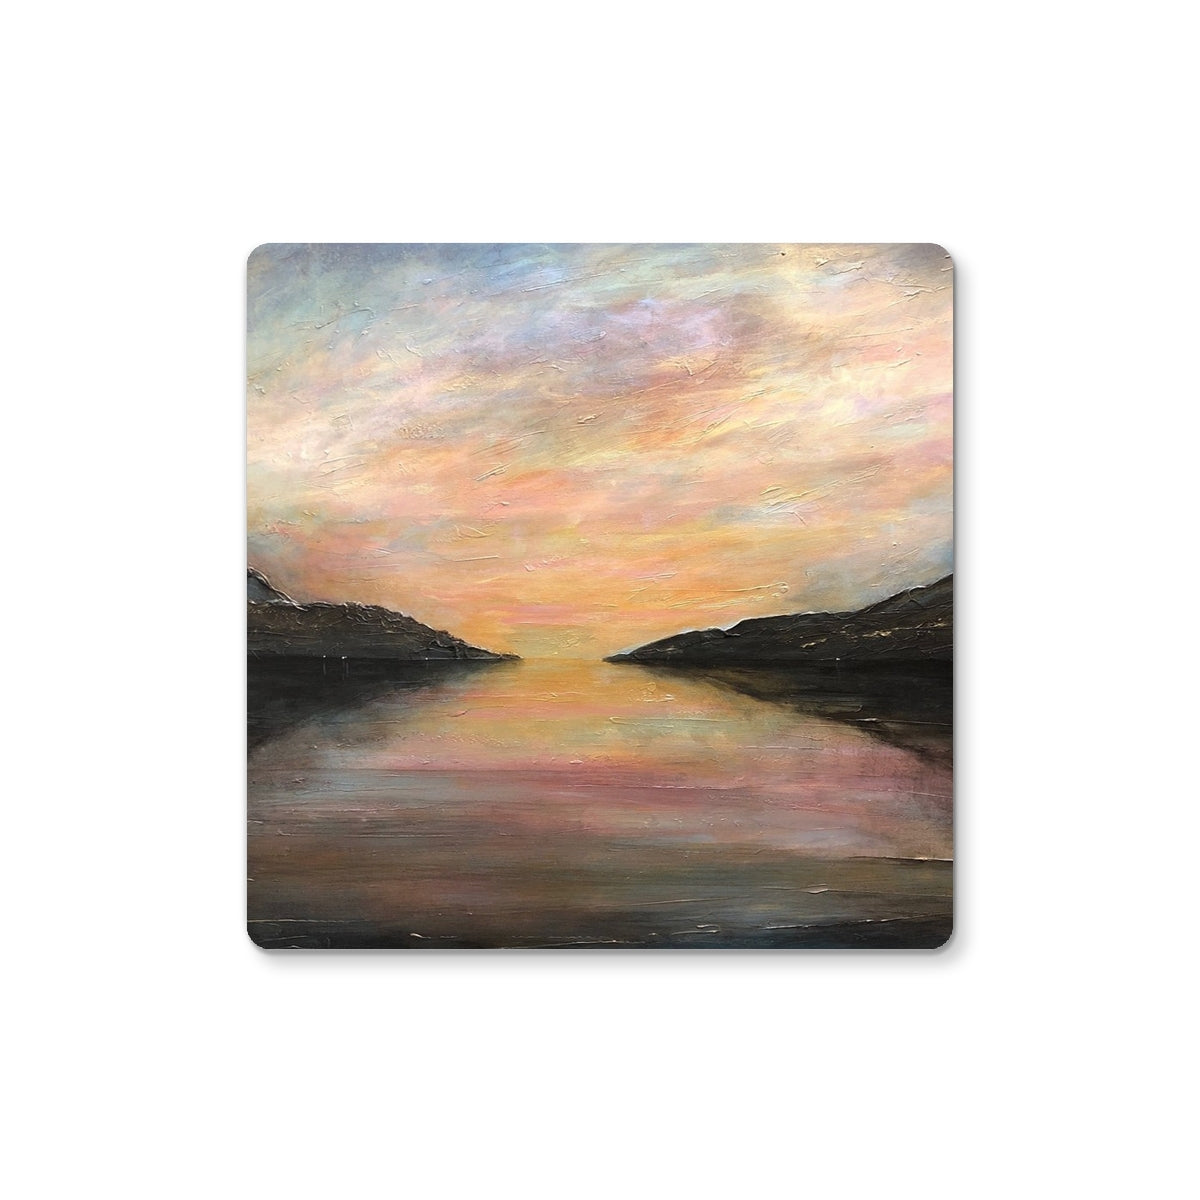 Loch Ness Glow Art Gifts Coaster-Coasters-Scottish Lochs & Mountains Art Gallery-2 Coasters-Paintings, Prints, Homeware, Art Gifts From Scotland By Scottish Artist Kevin Hunter